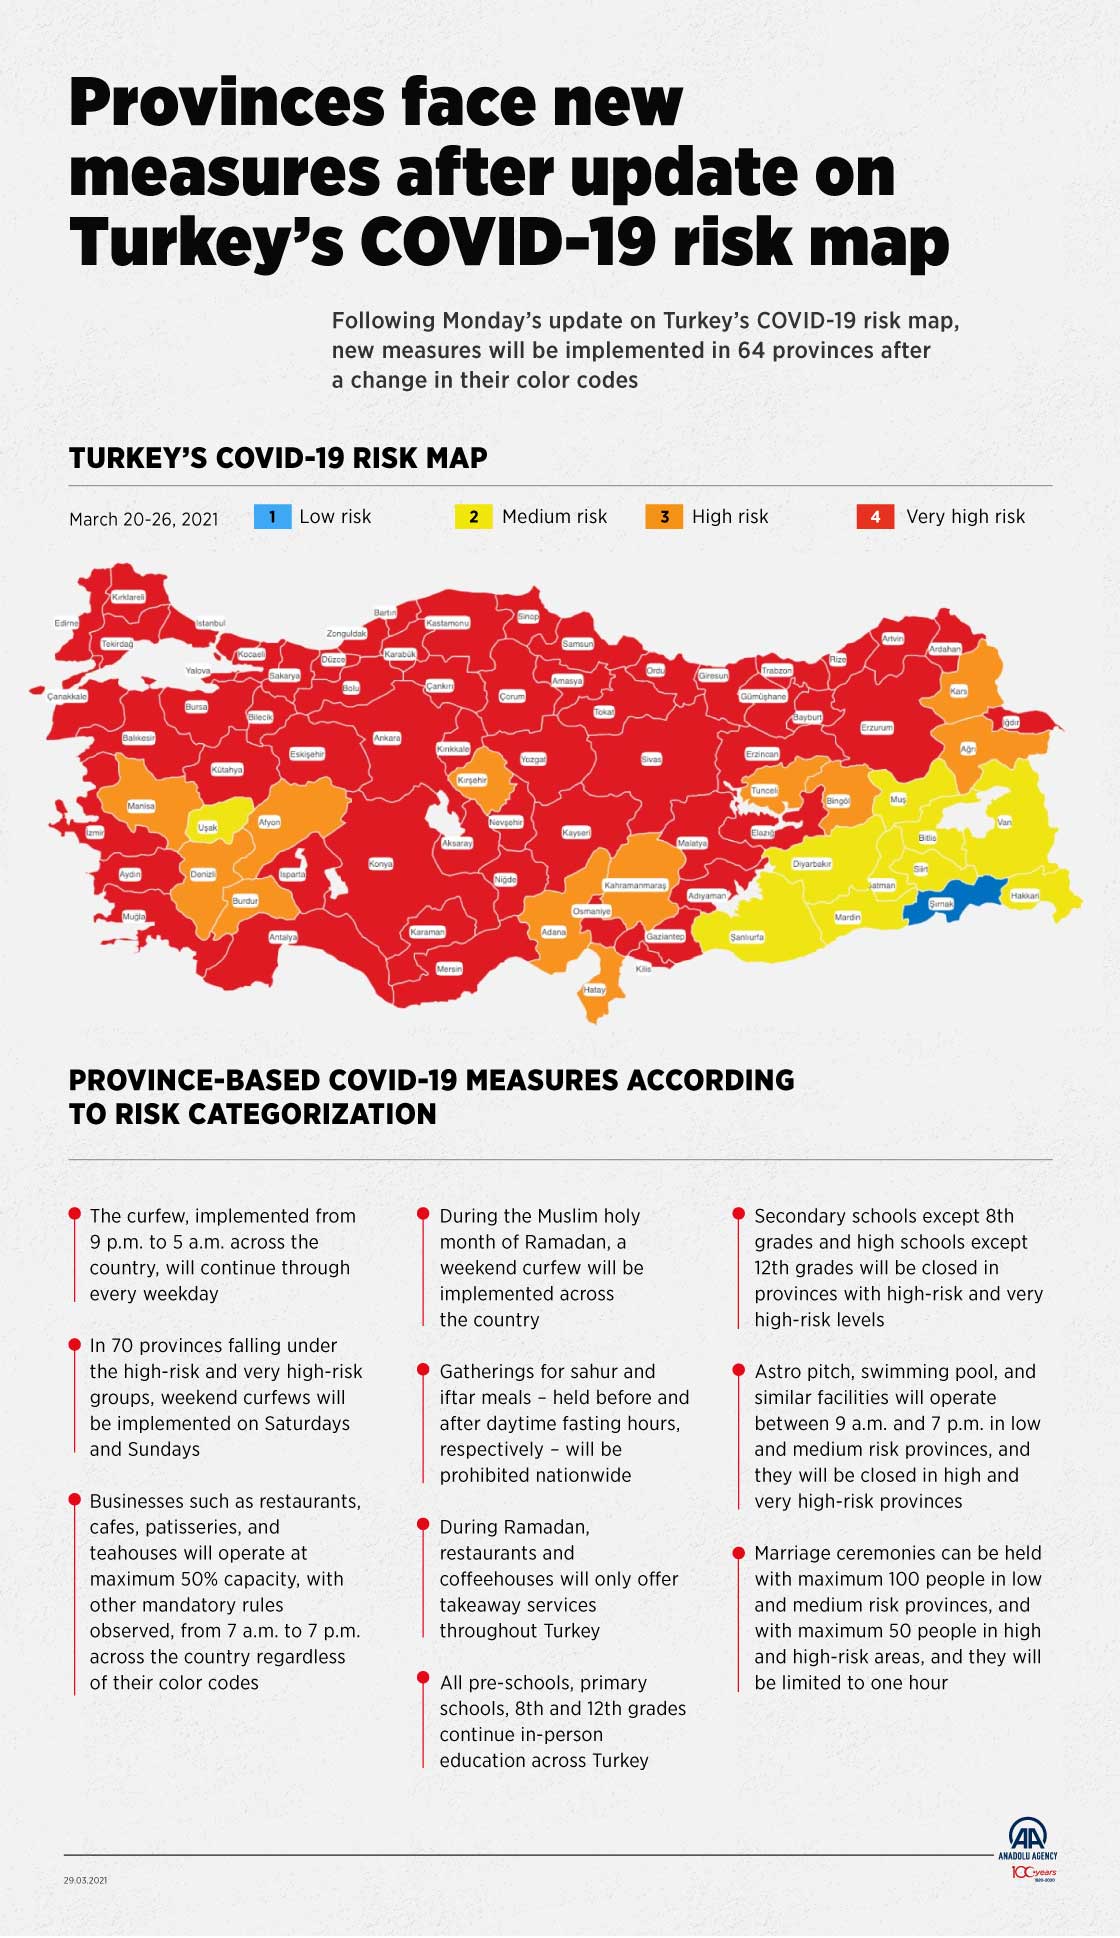 Provinces face new measures after update on Turkey’s COVID-19 risk map